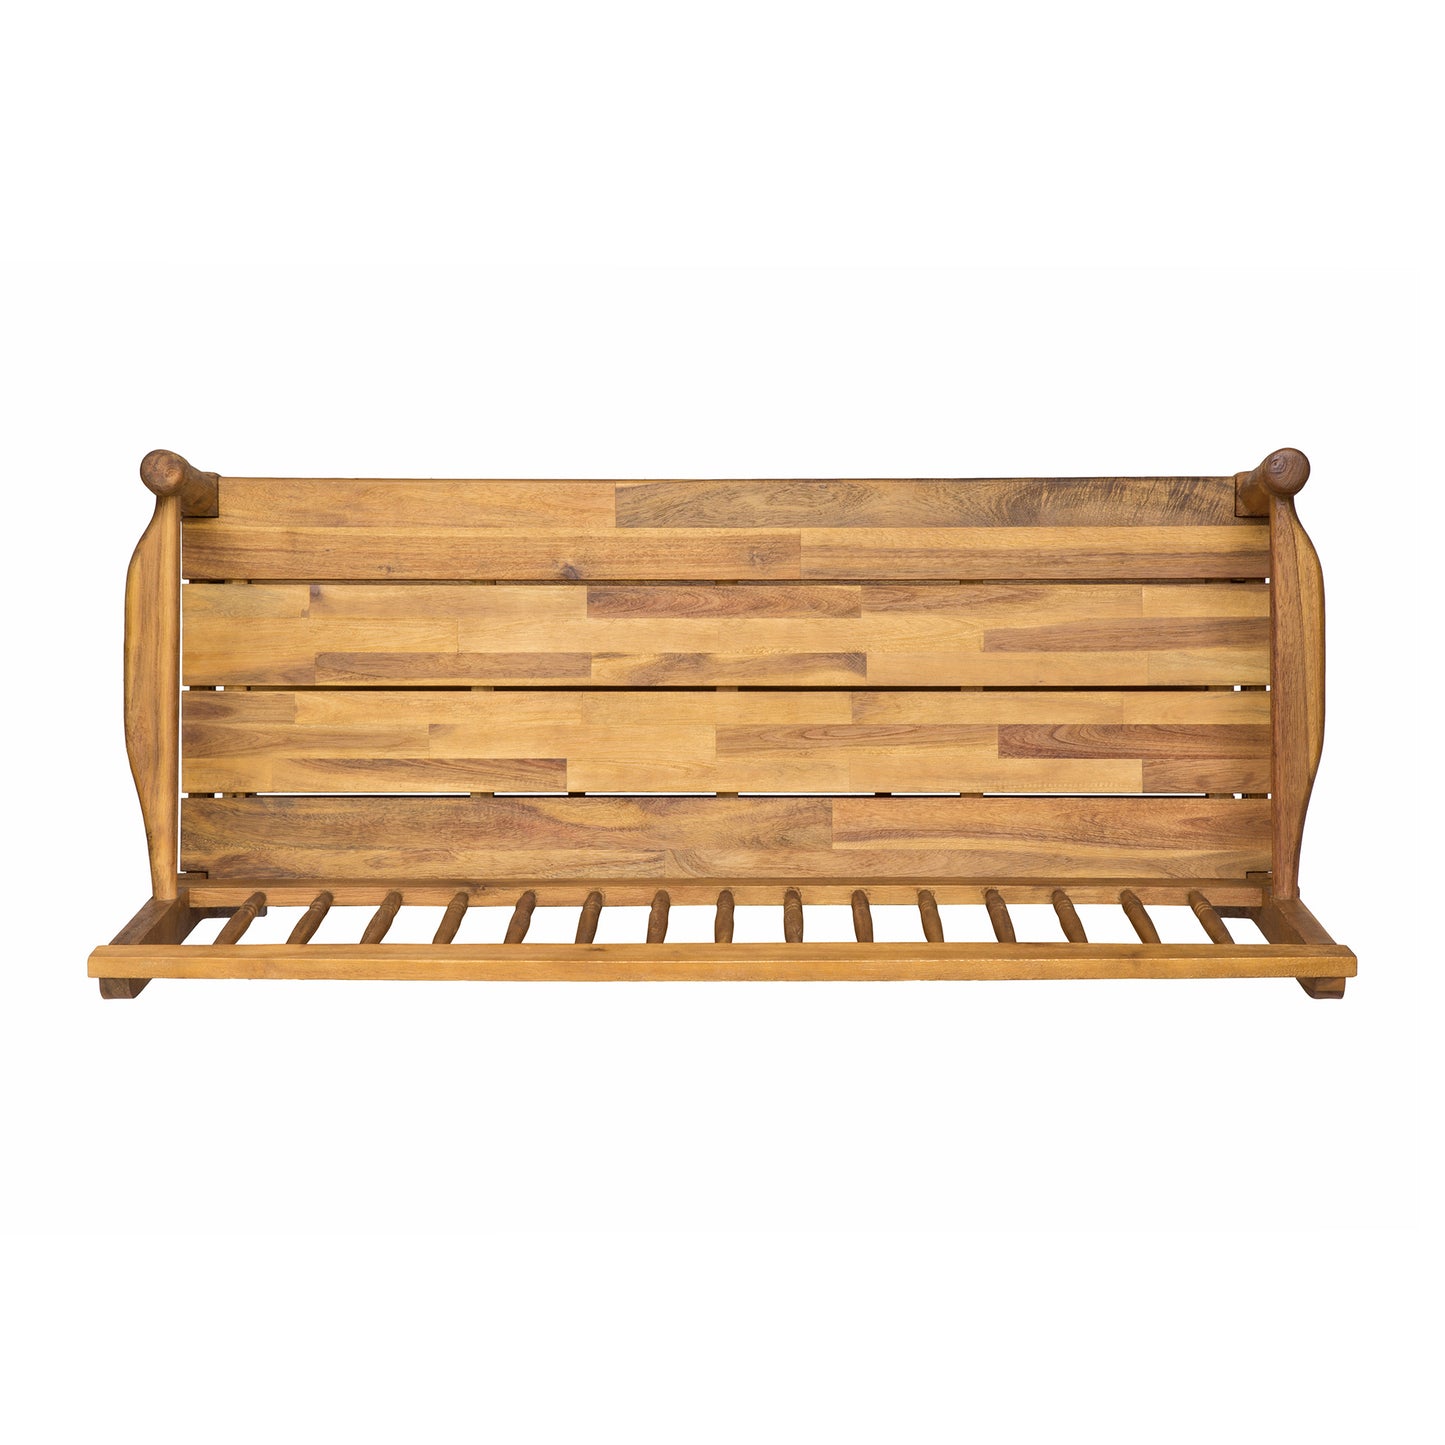 Kuhn Outdoor Acacia Wood Bench with Shelf